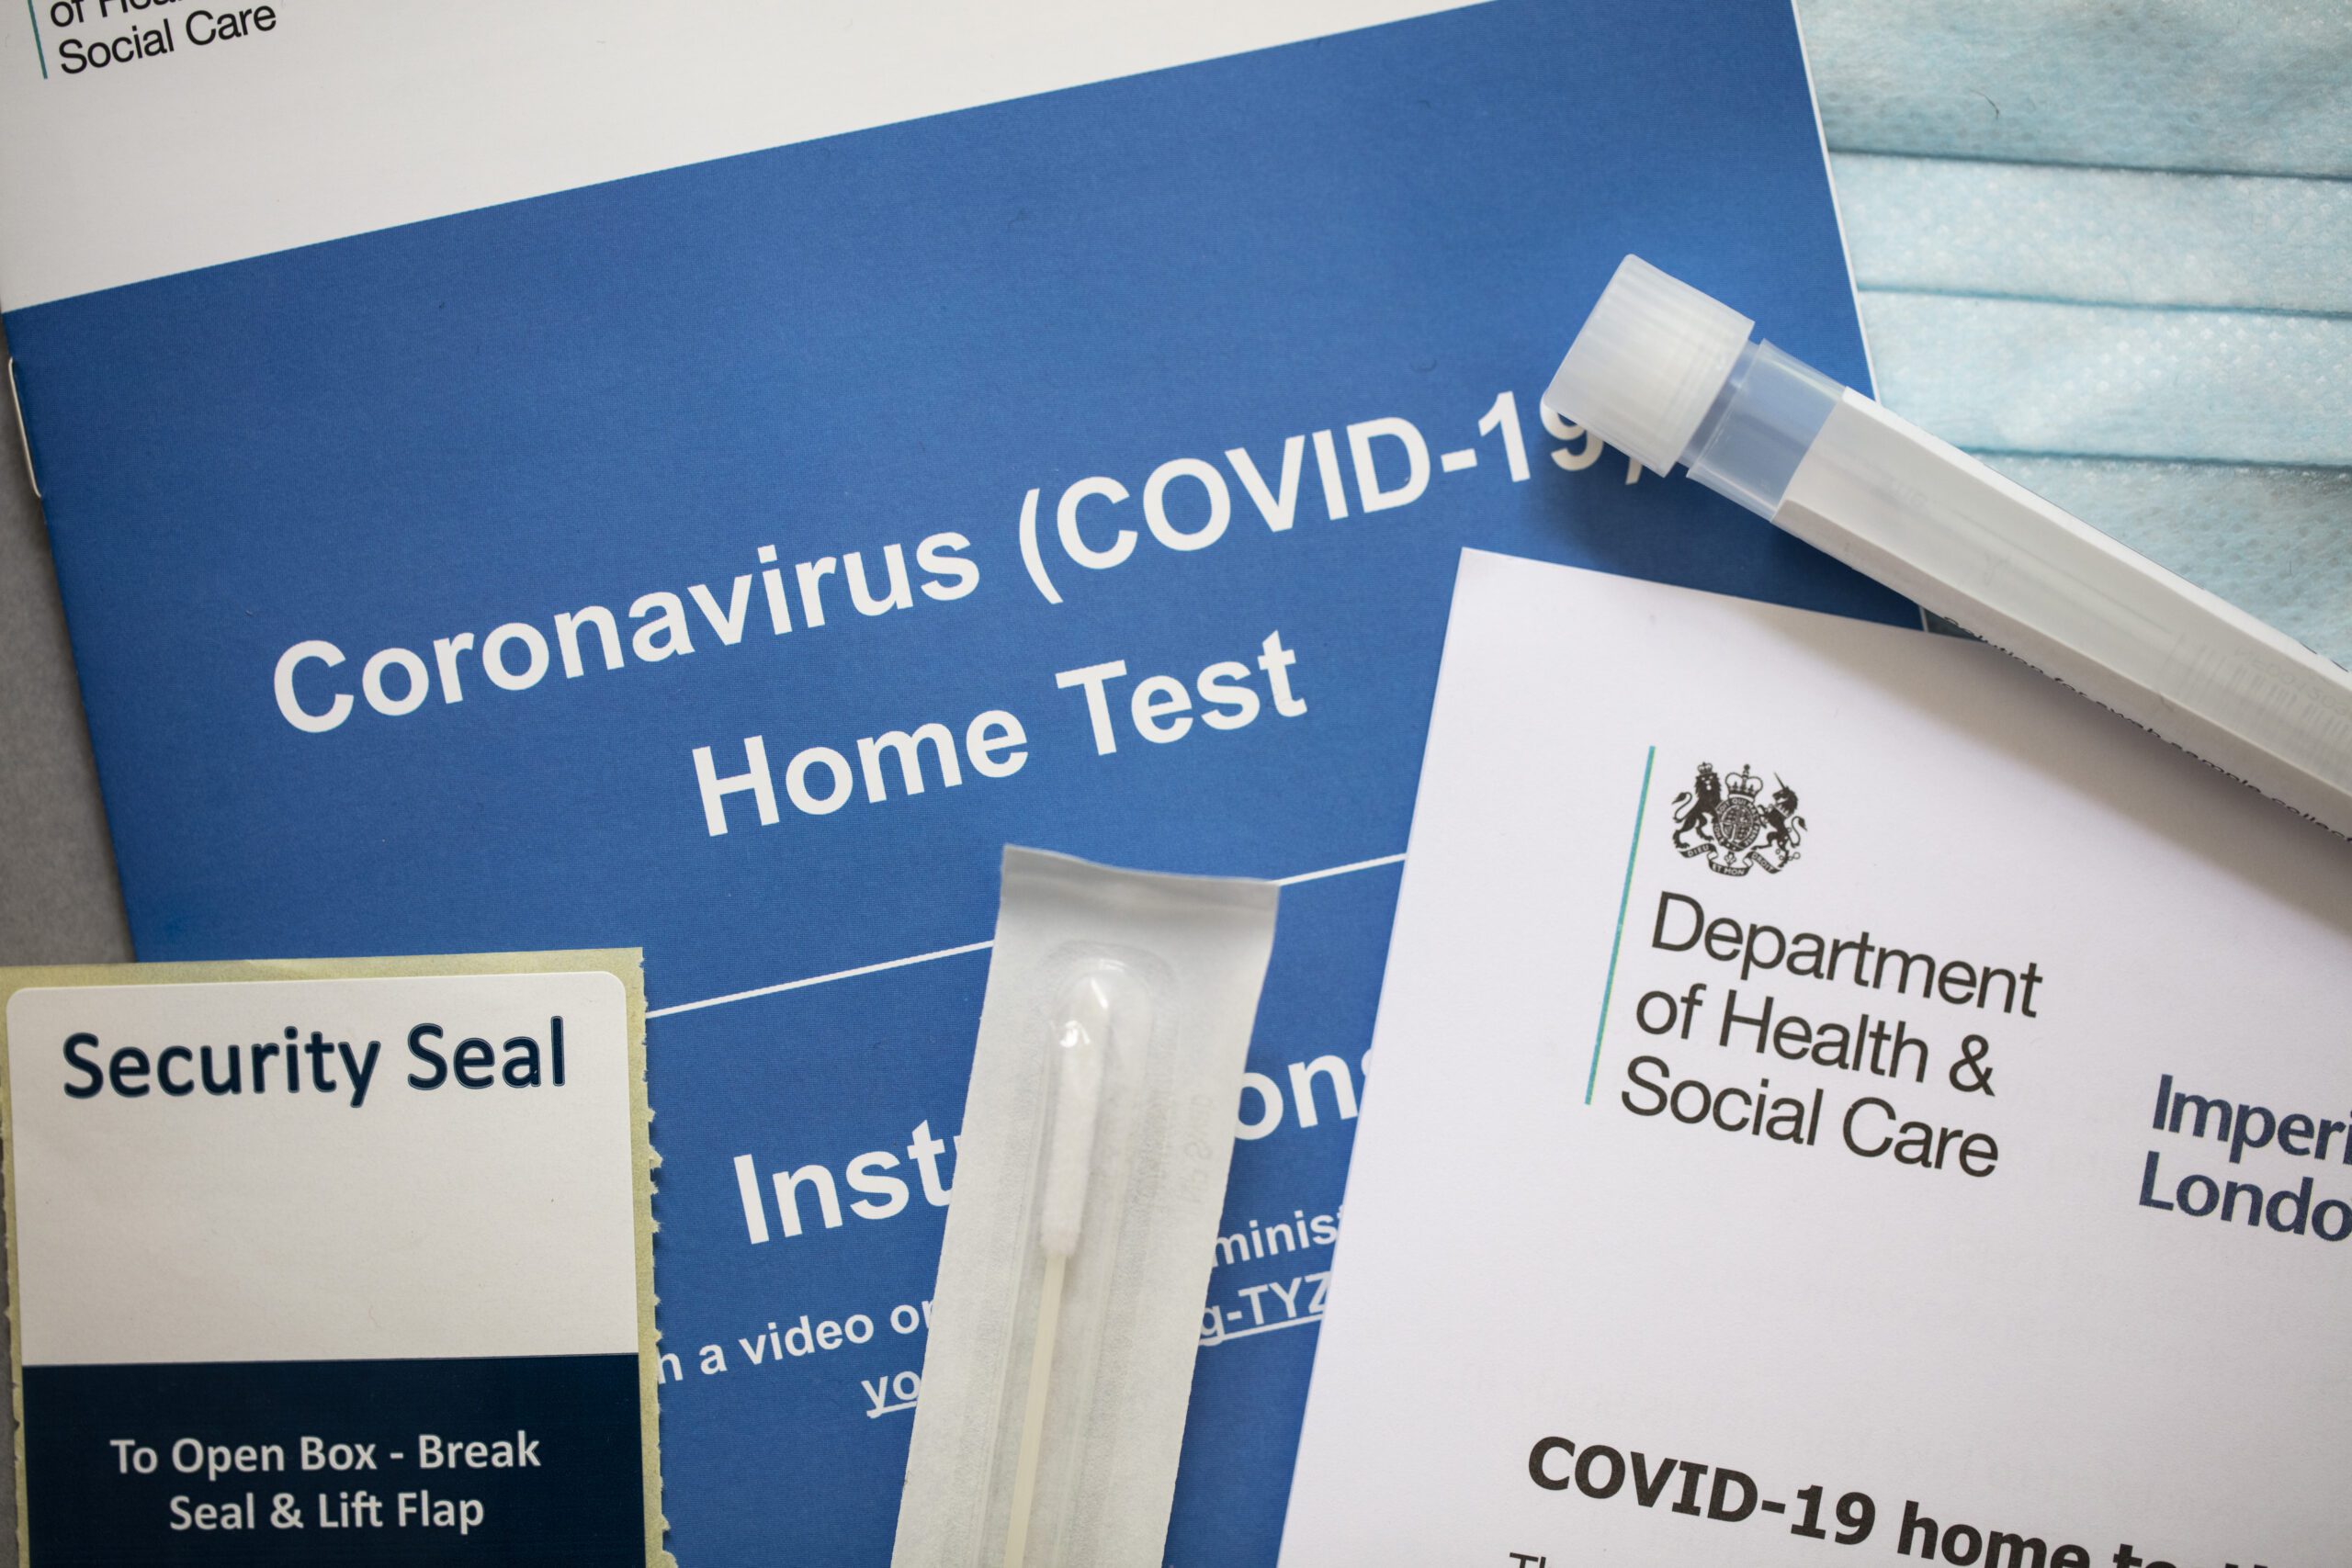 can employers ask for proof of negative covid test